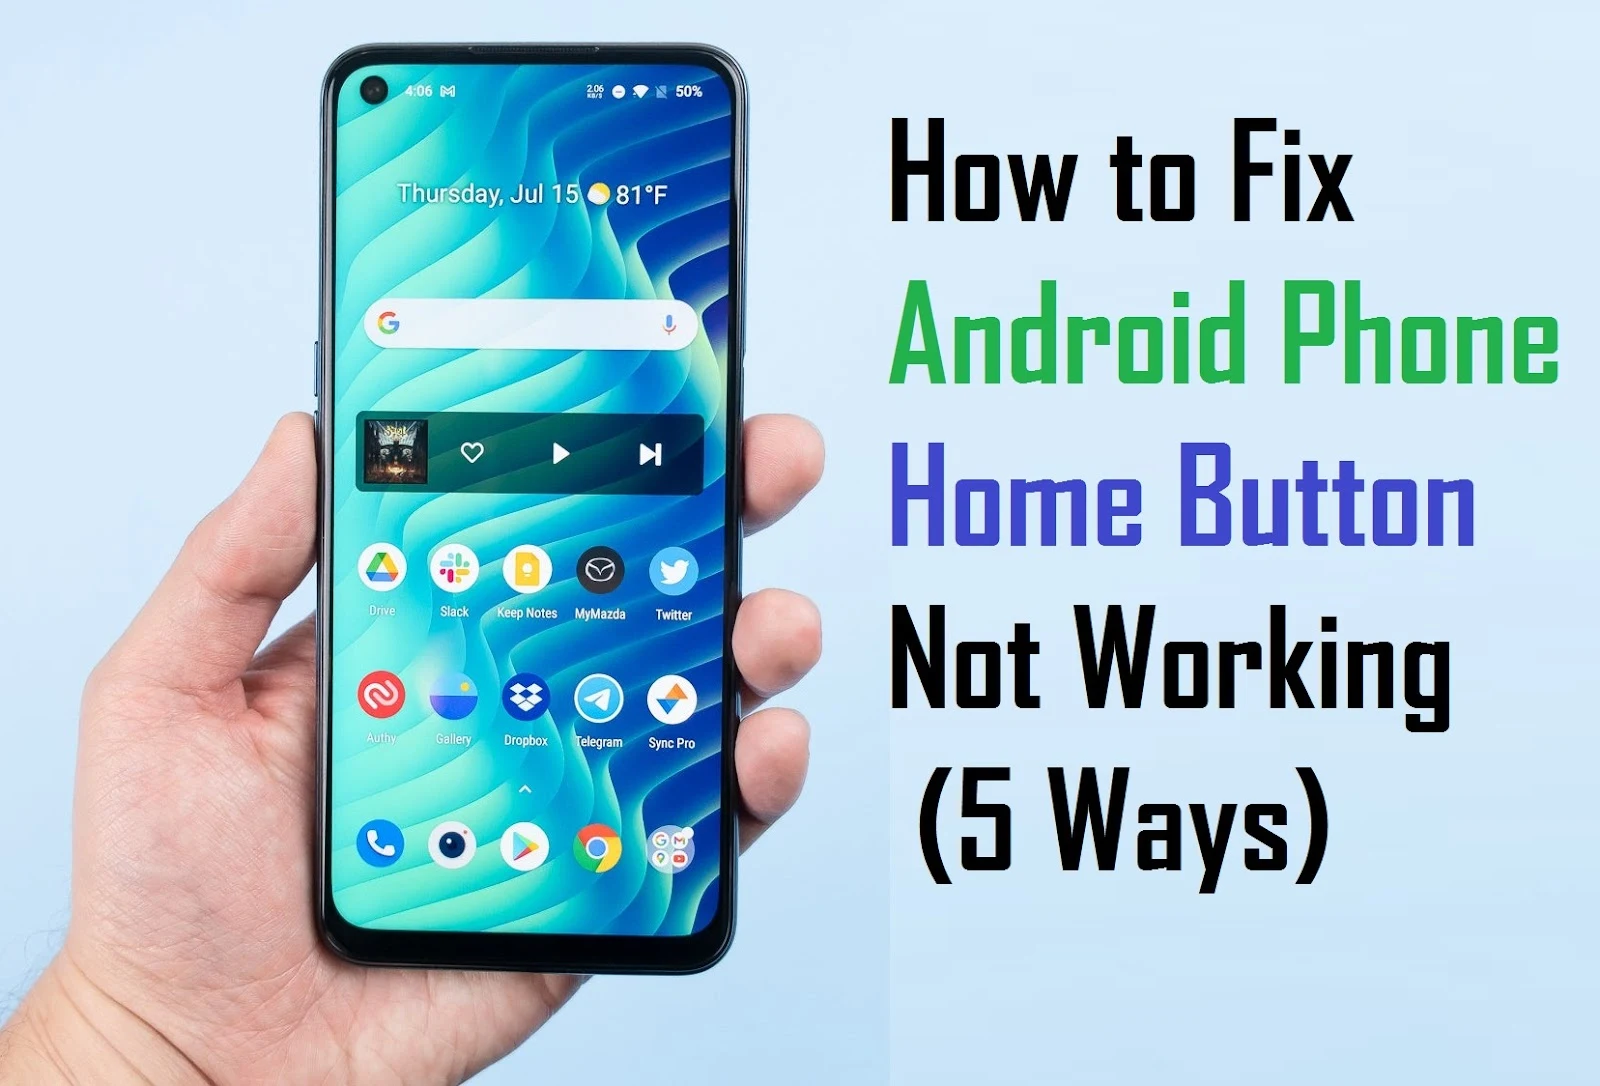 How to Fix Android Phone Home Button Not Working